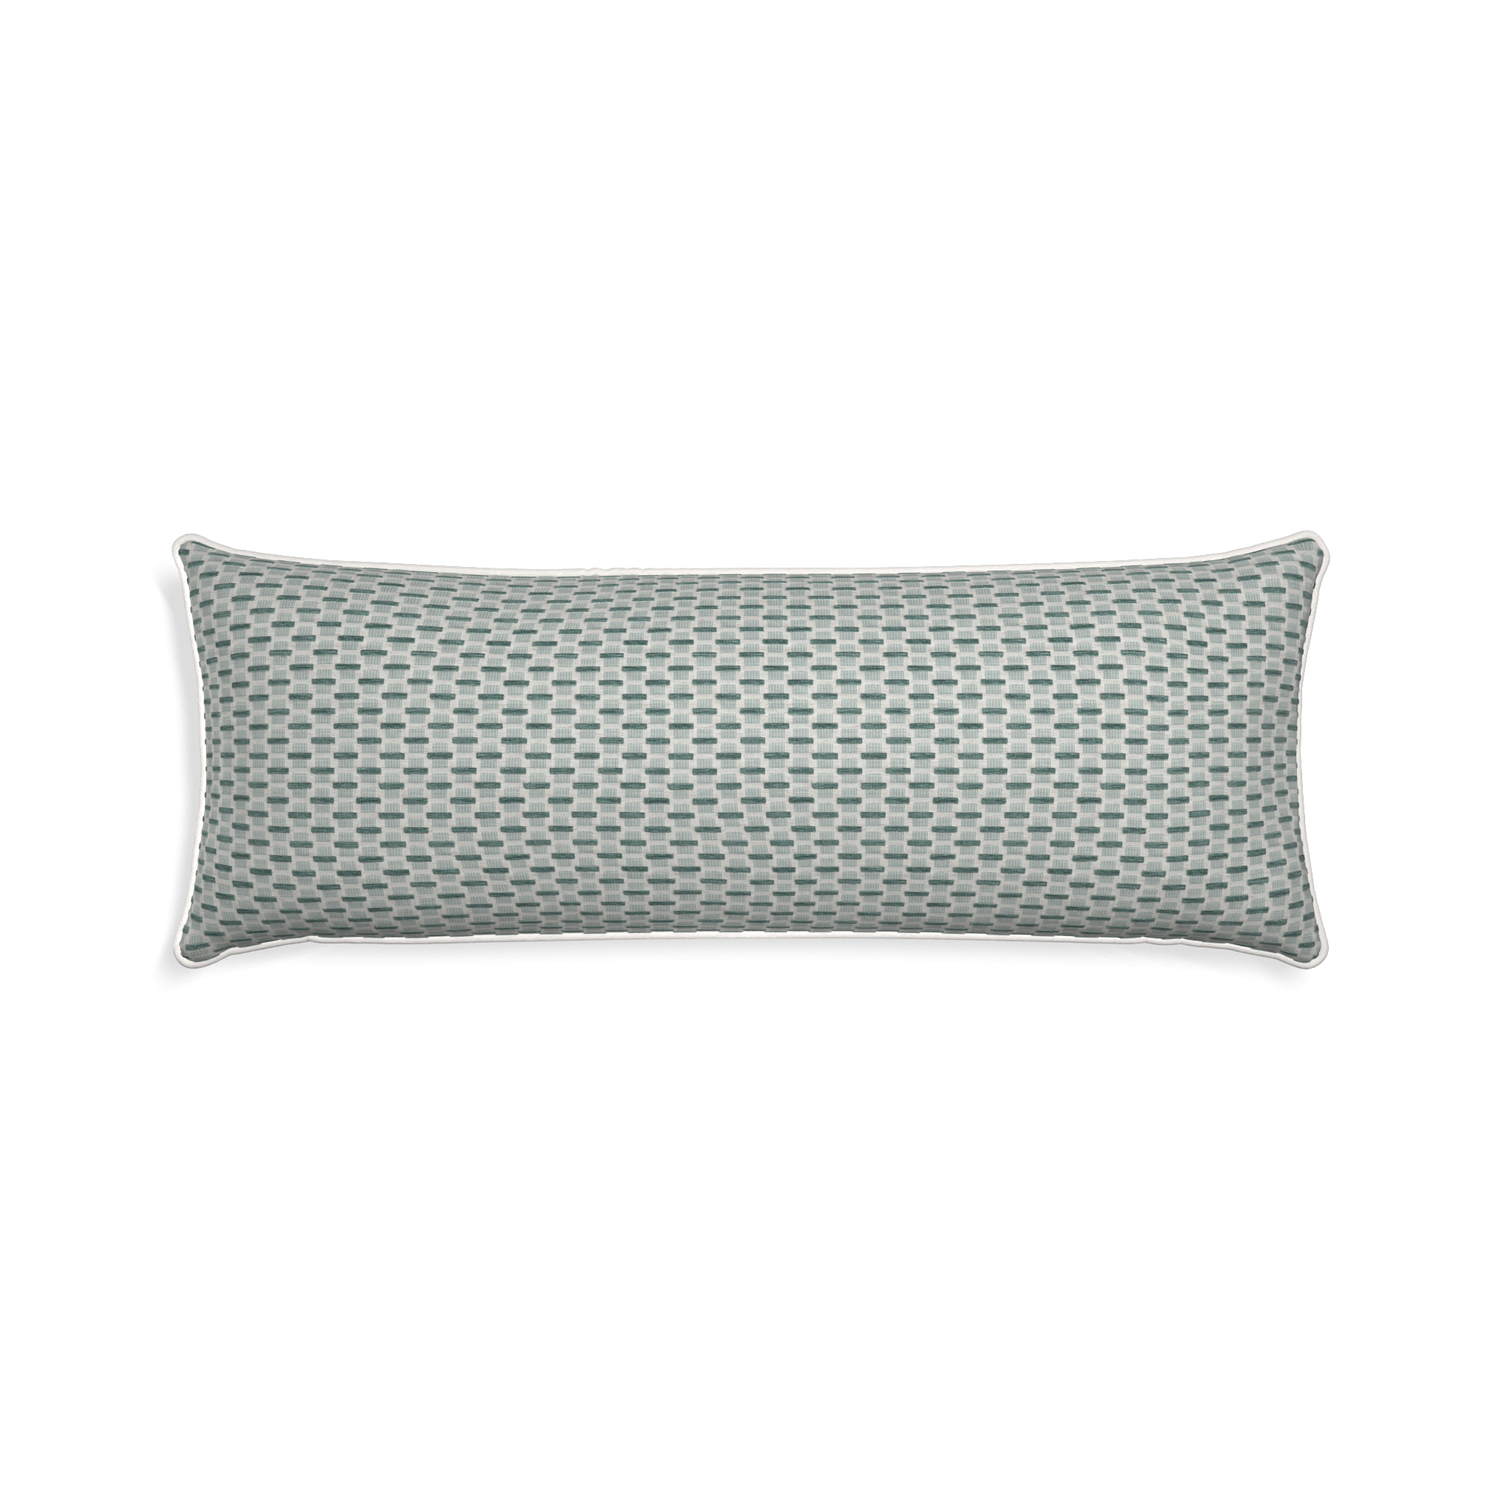 Xl-lumbar willow mint custom green geometric chenillepillow with snow piping on white background